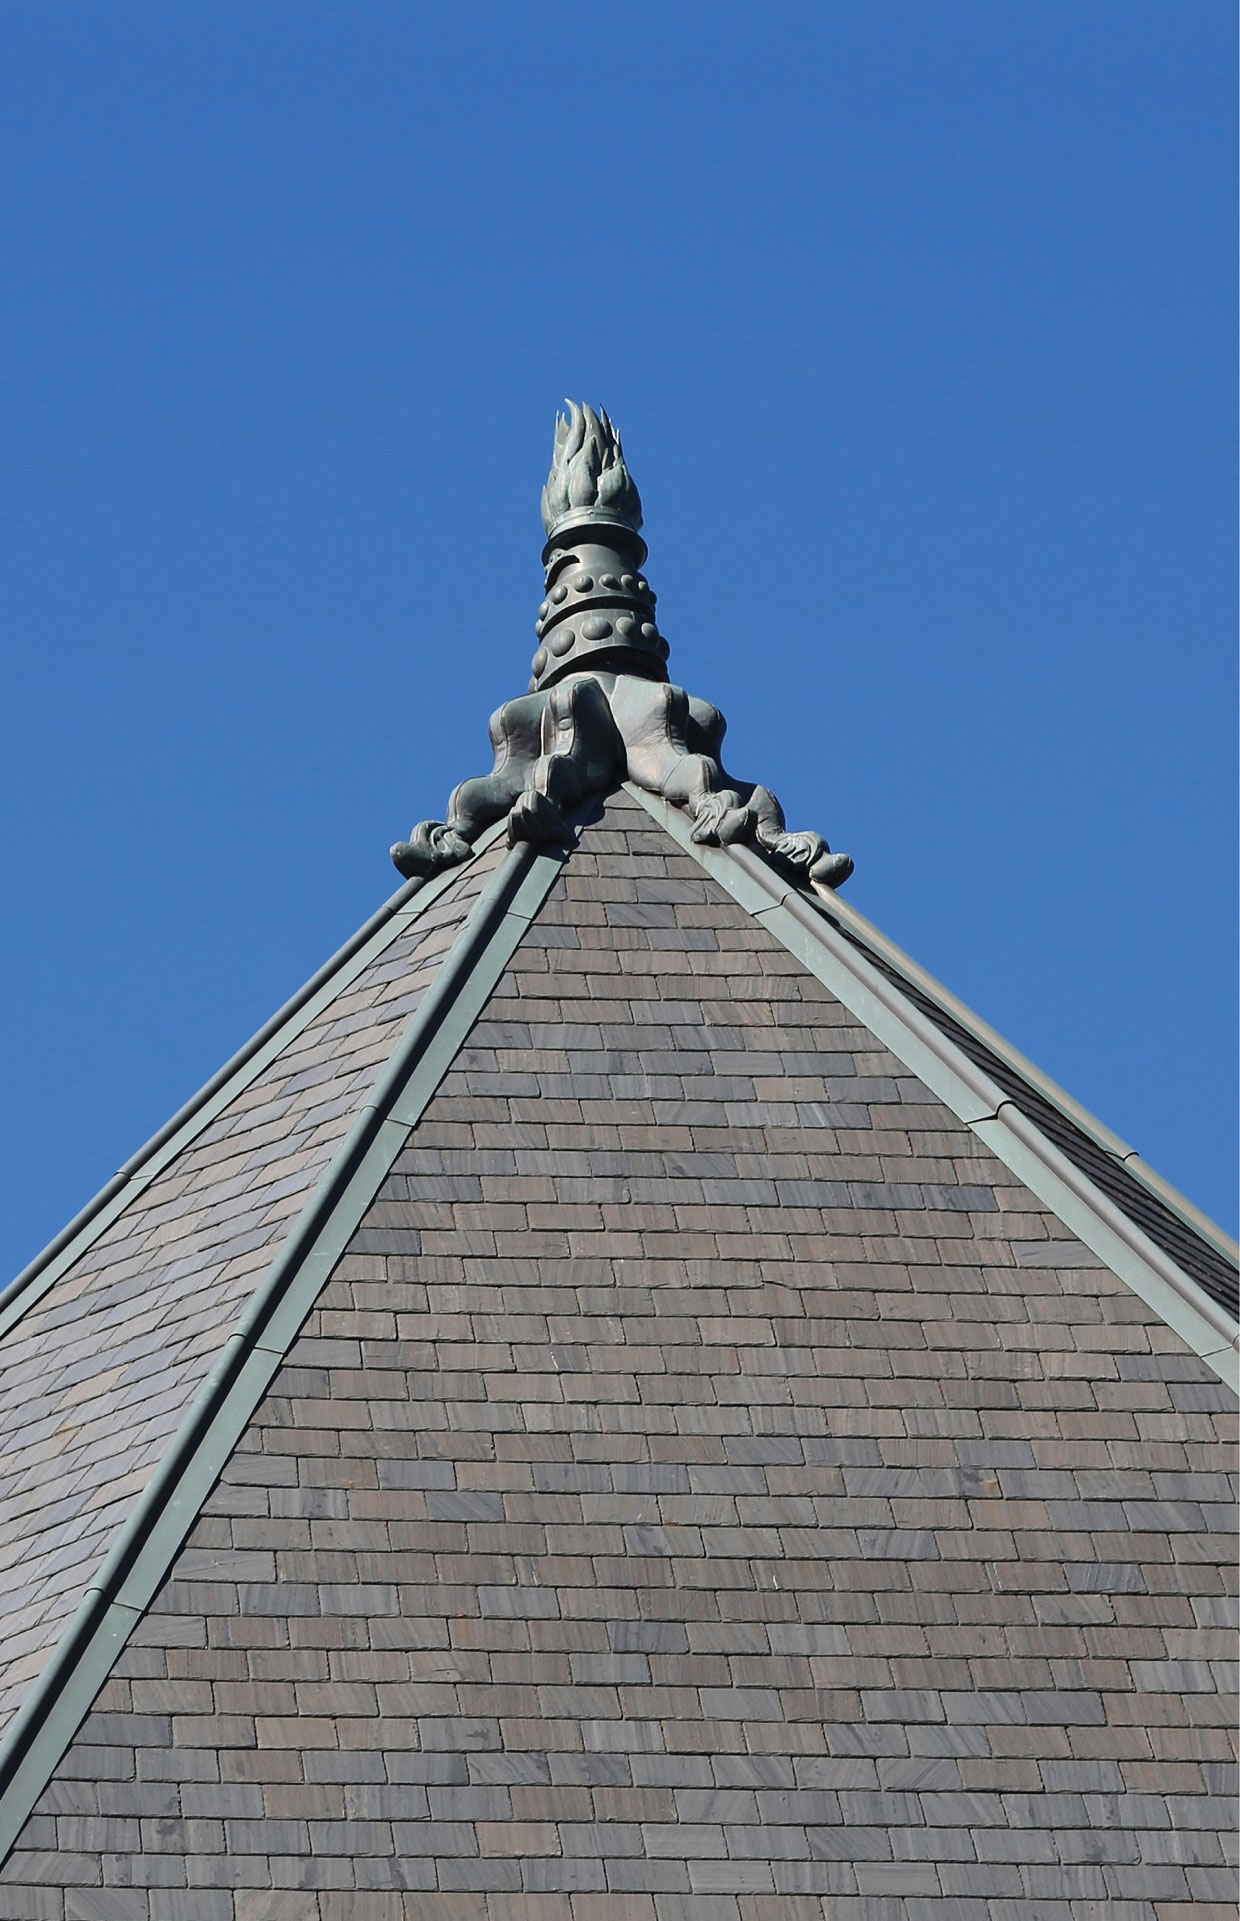 Close-up of a copper finial on the slate roof of the Legislative building.